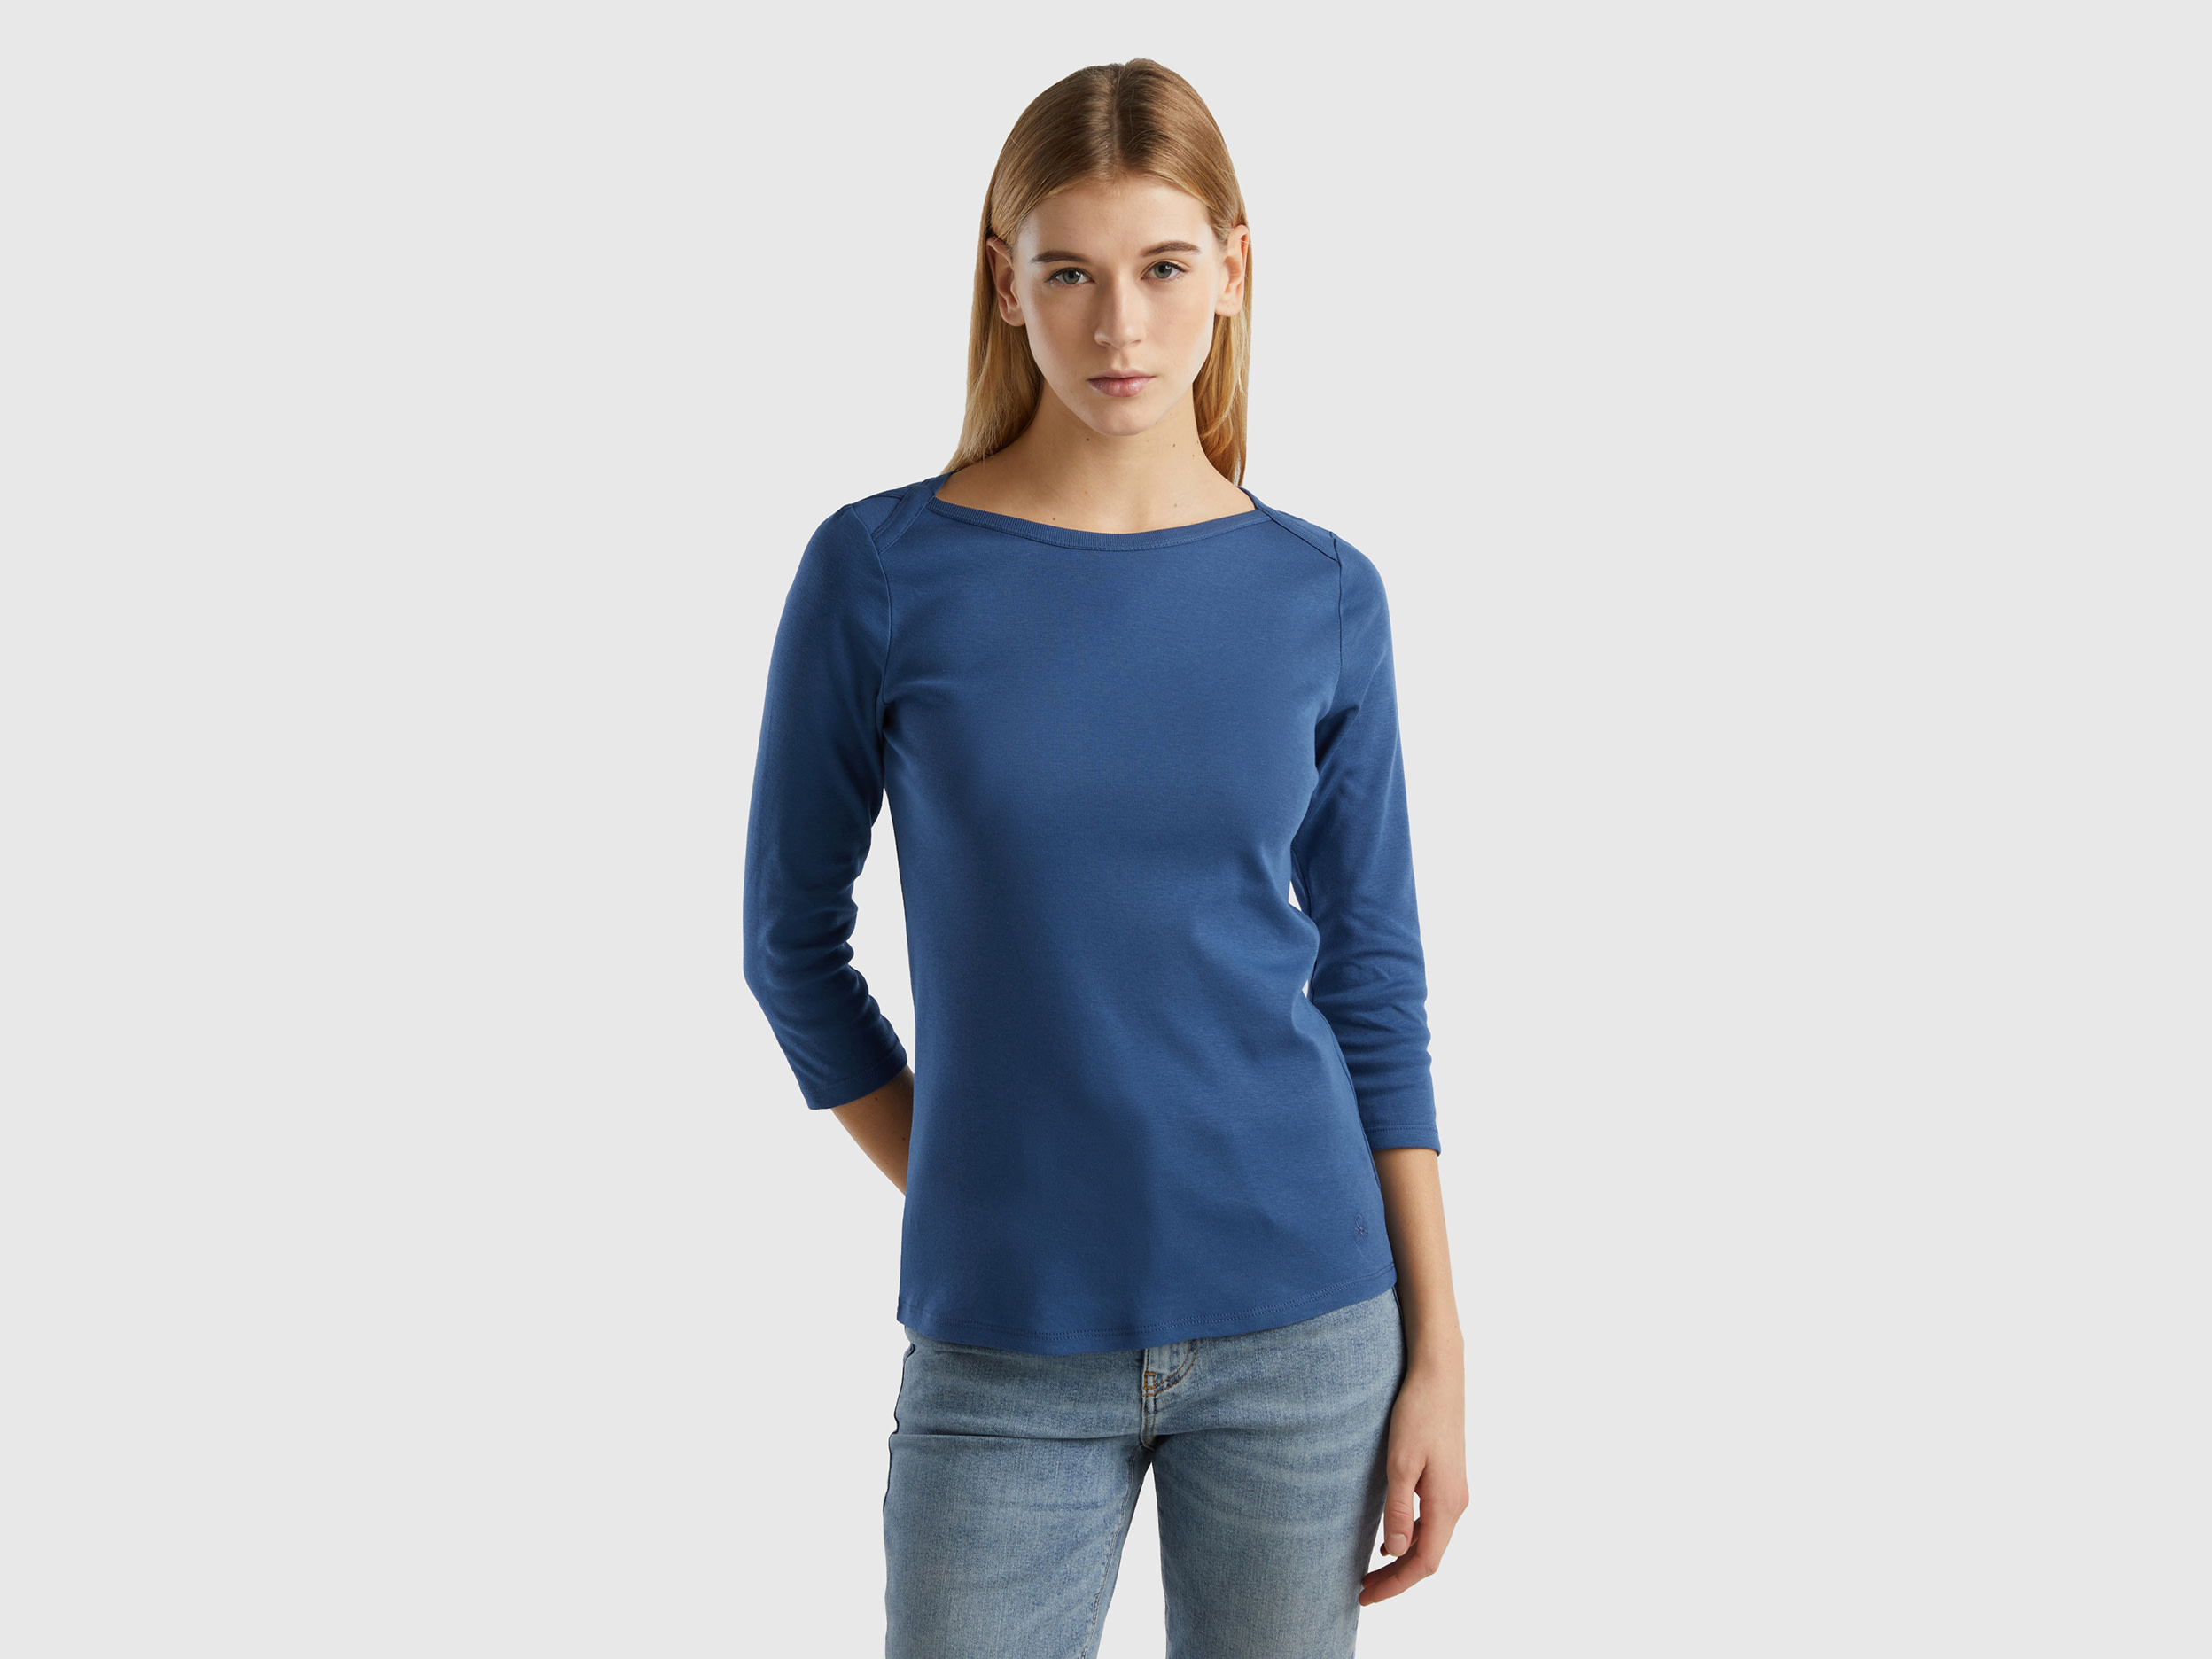 Benetton, T-shirt With Boat Neck In 100% Cotton, size M, Air Force Blue, Women